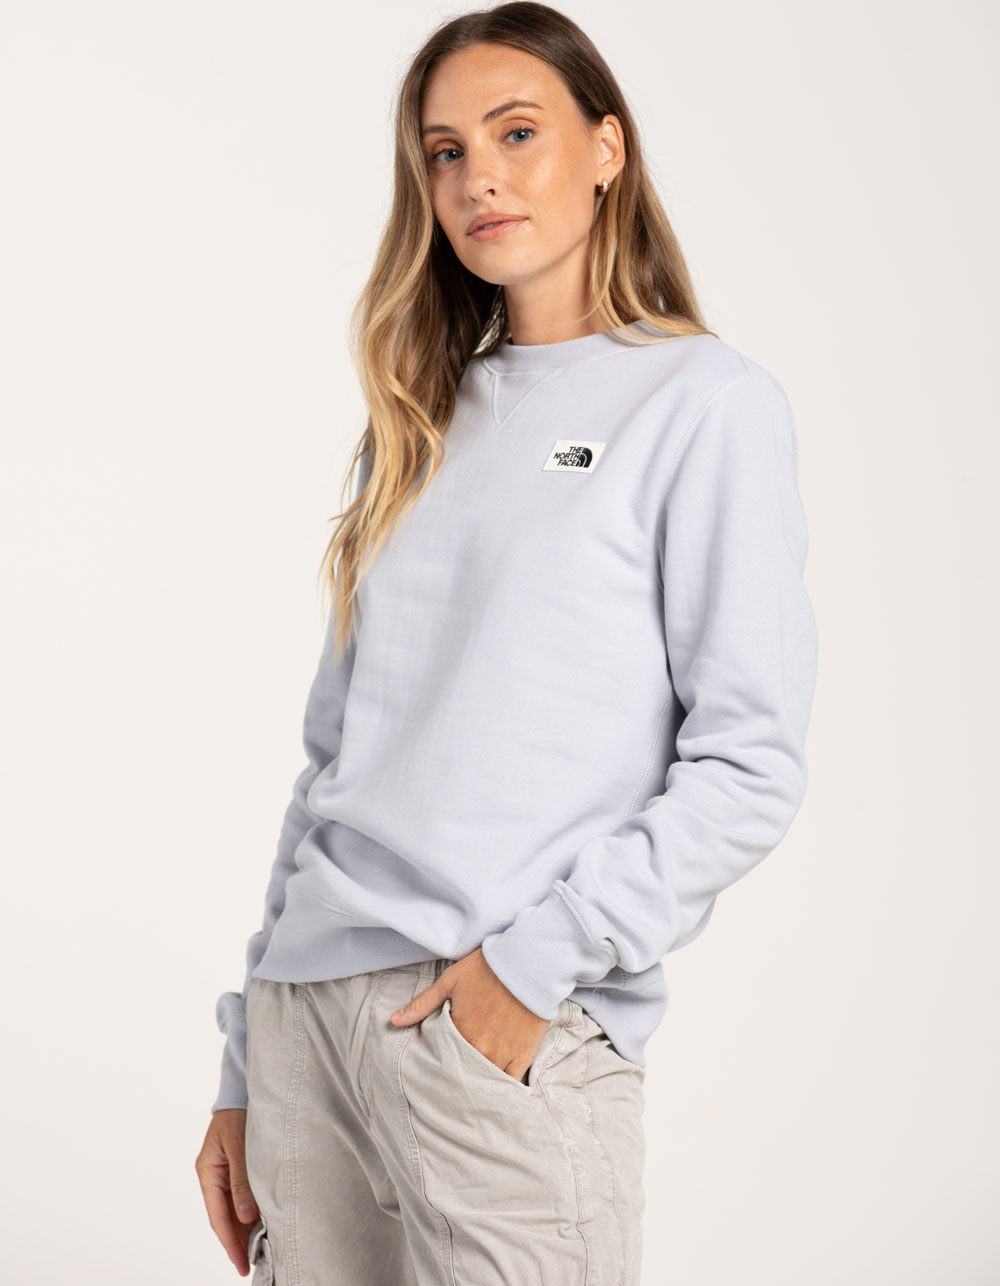 Womens - Patch NORTH PERIWINKLE FACE Heritage Sweatshirt THE Crewneck Tillys |